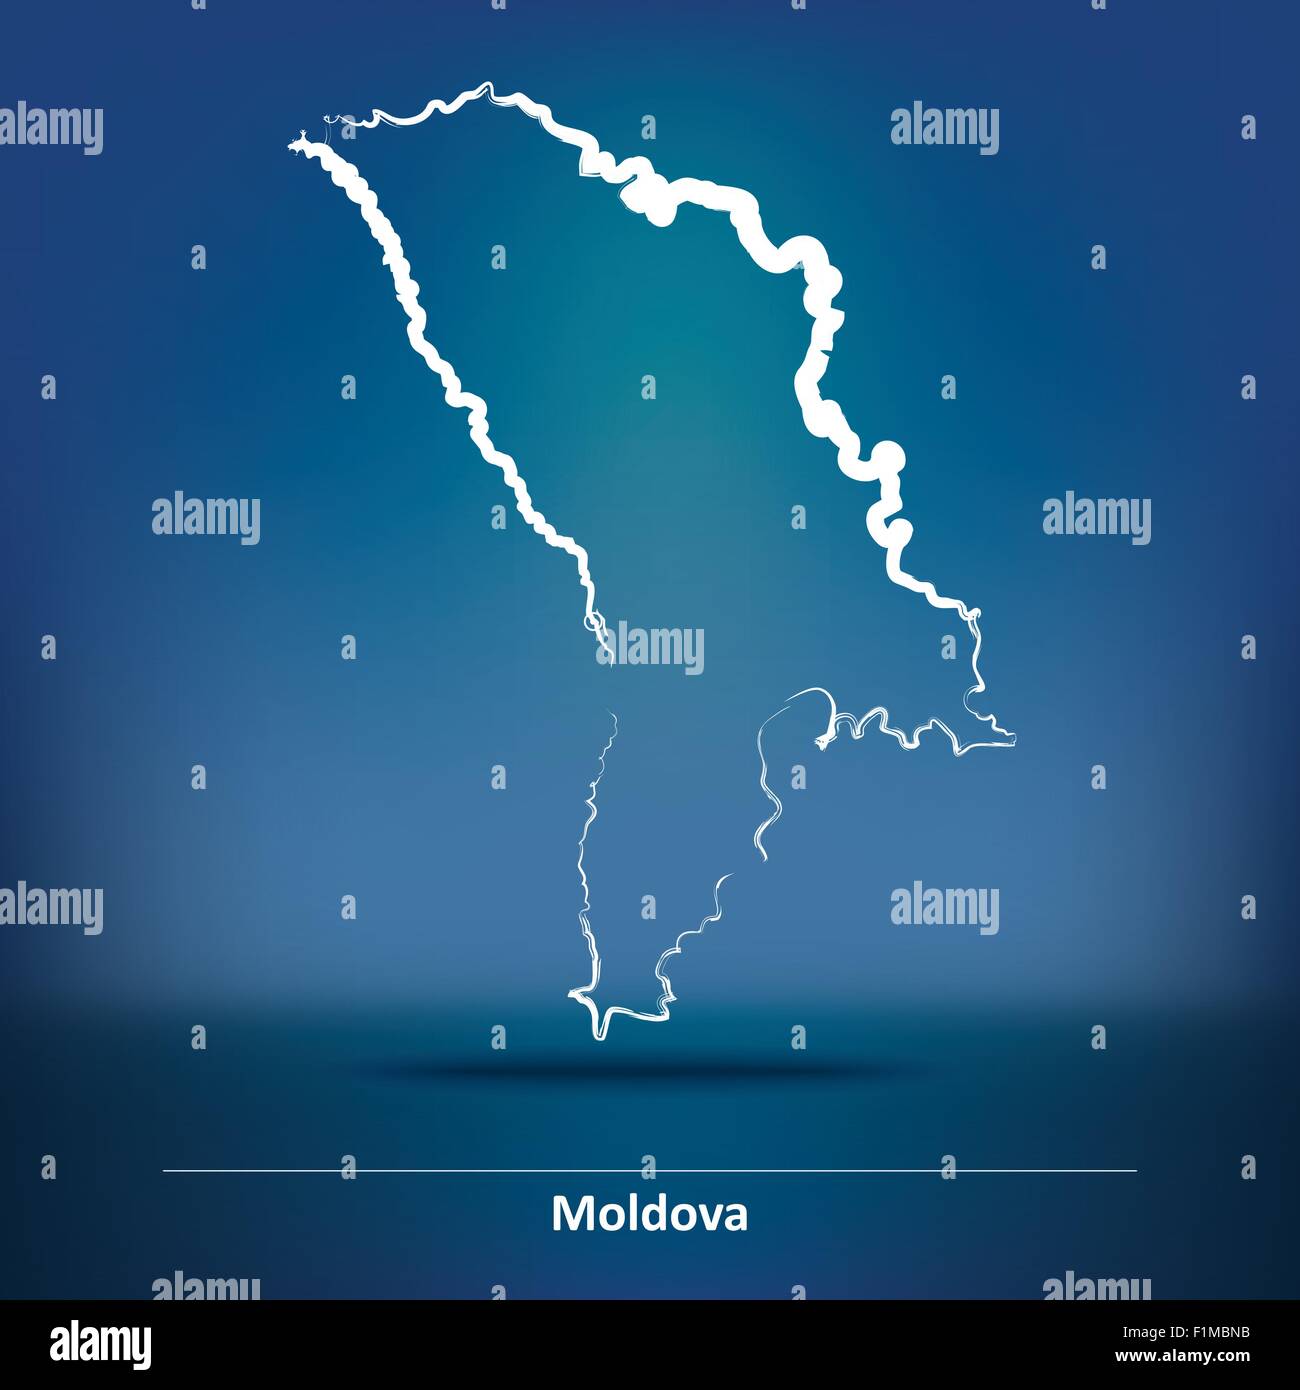 Doodle Map of Moldova - vector illustration Stock Vector